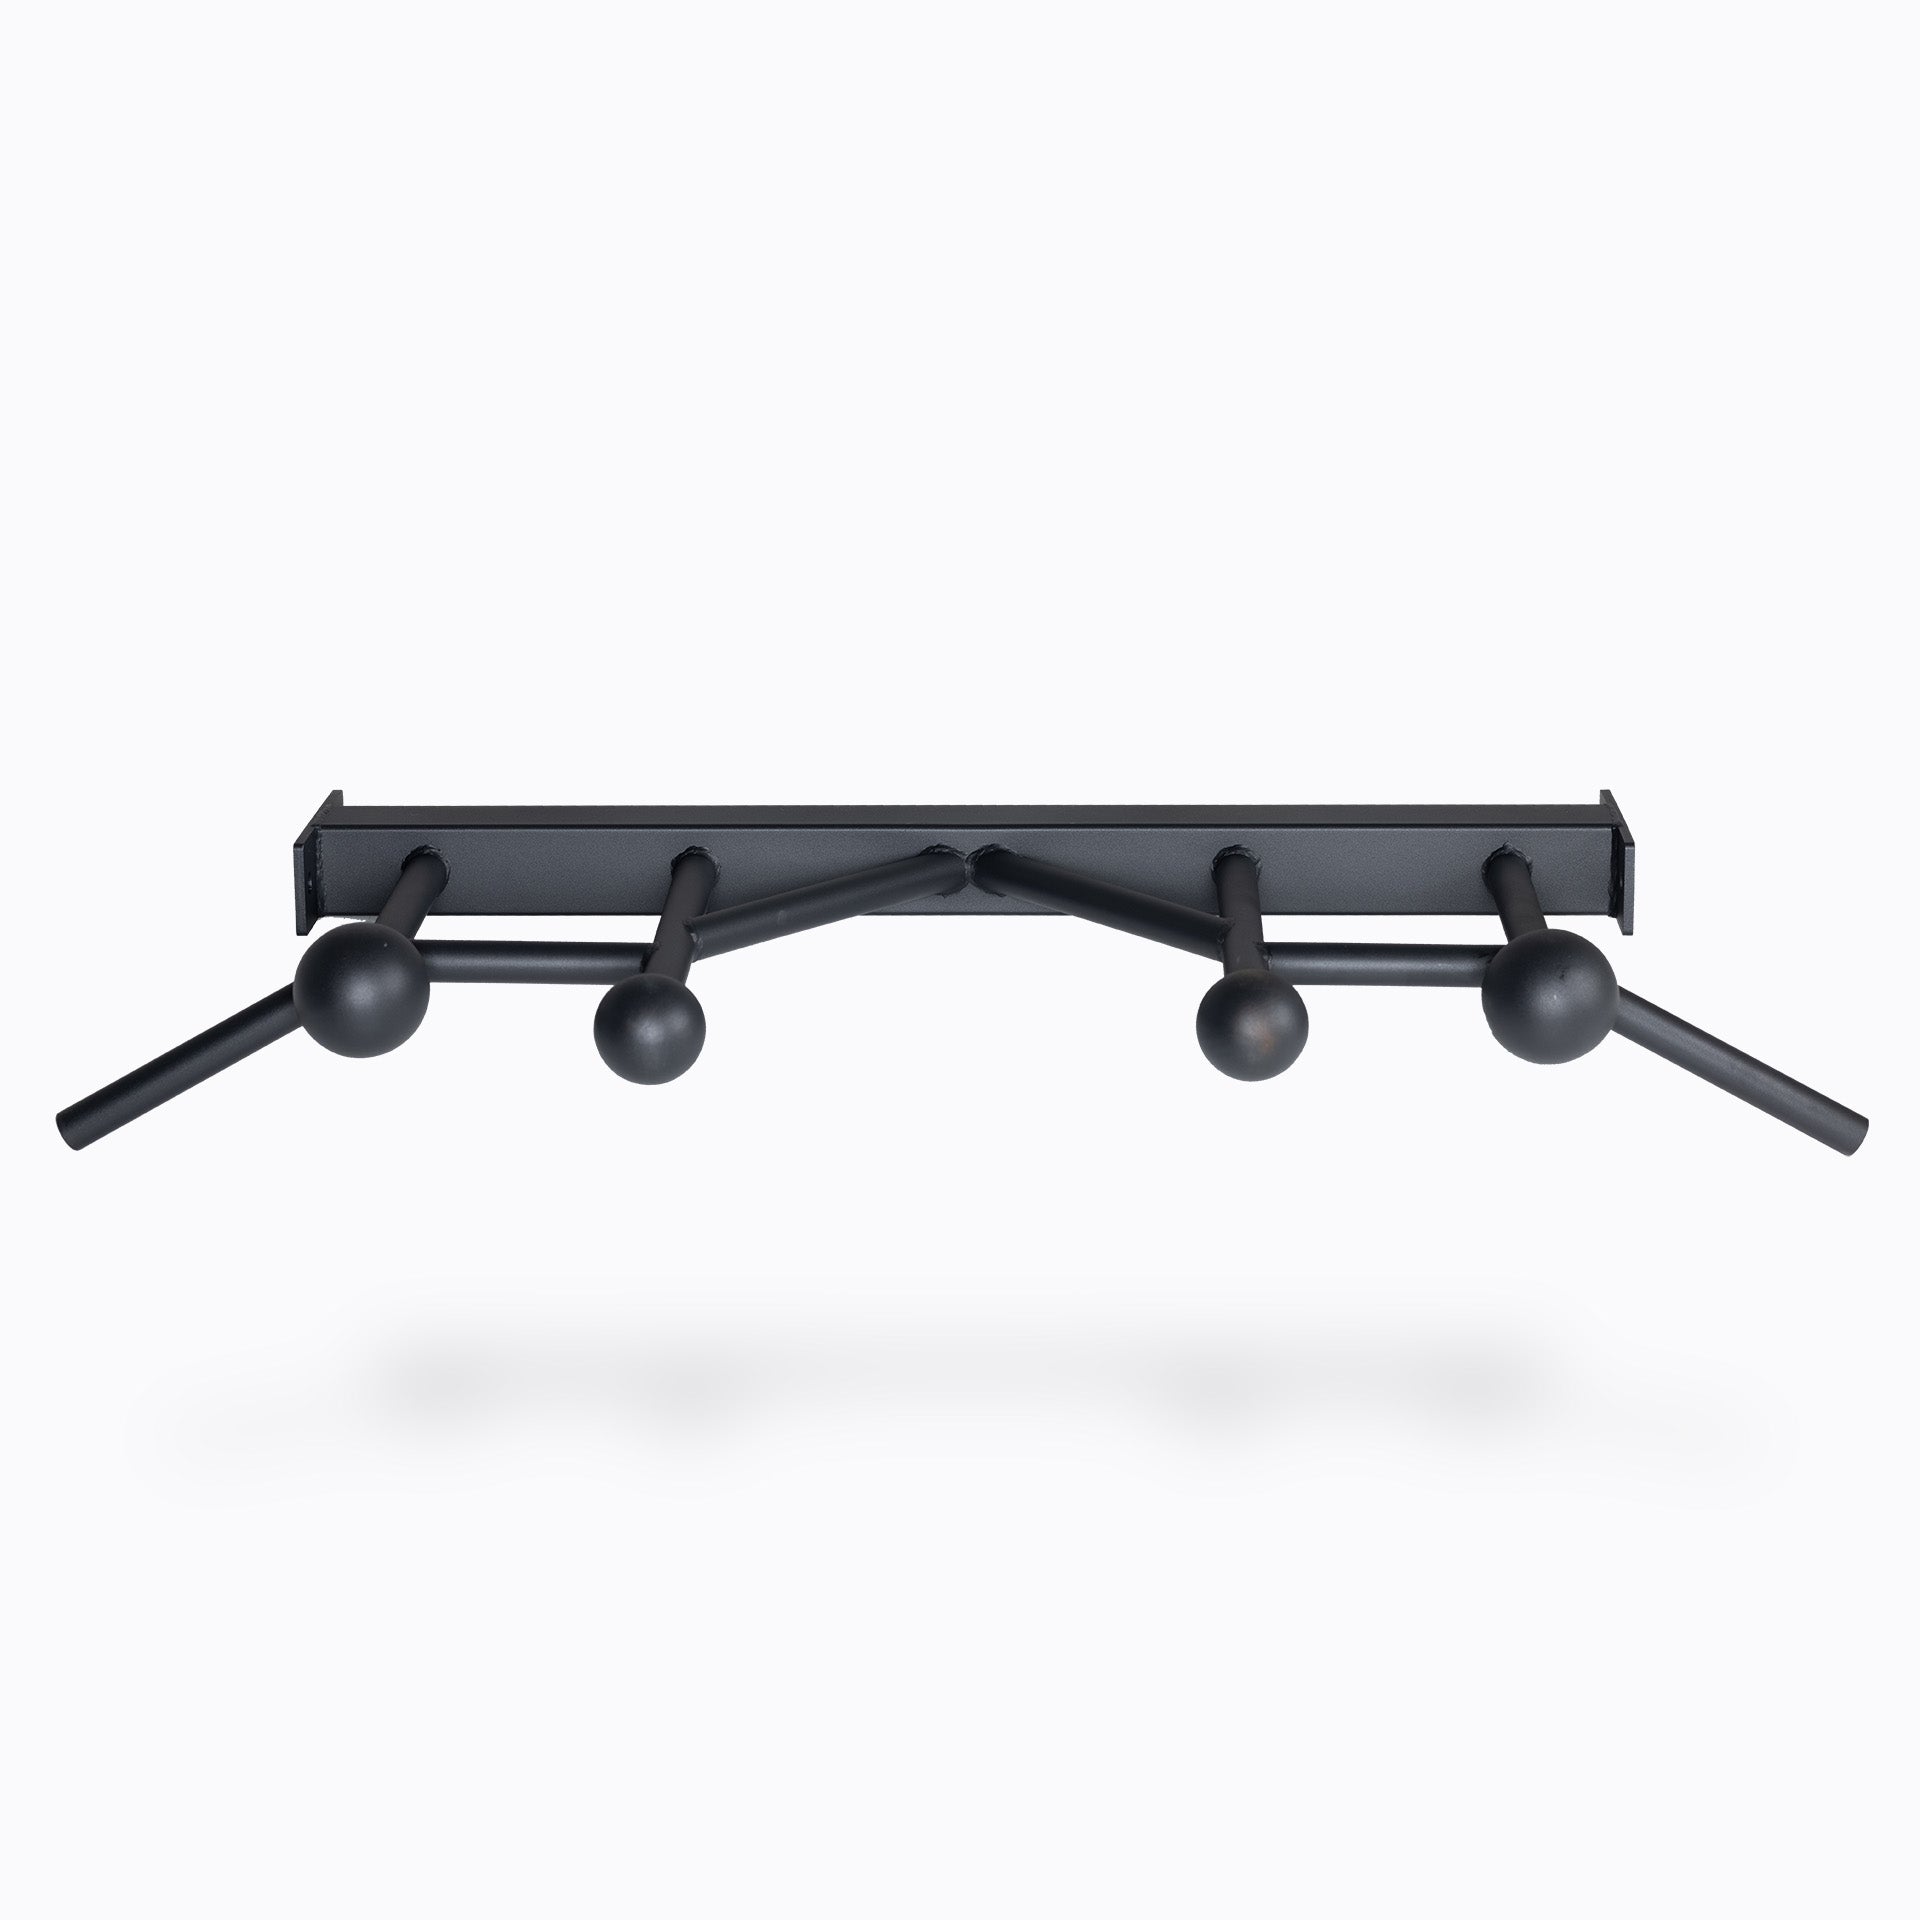 Globe Front Mount Pull-Up Bar